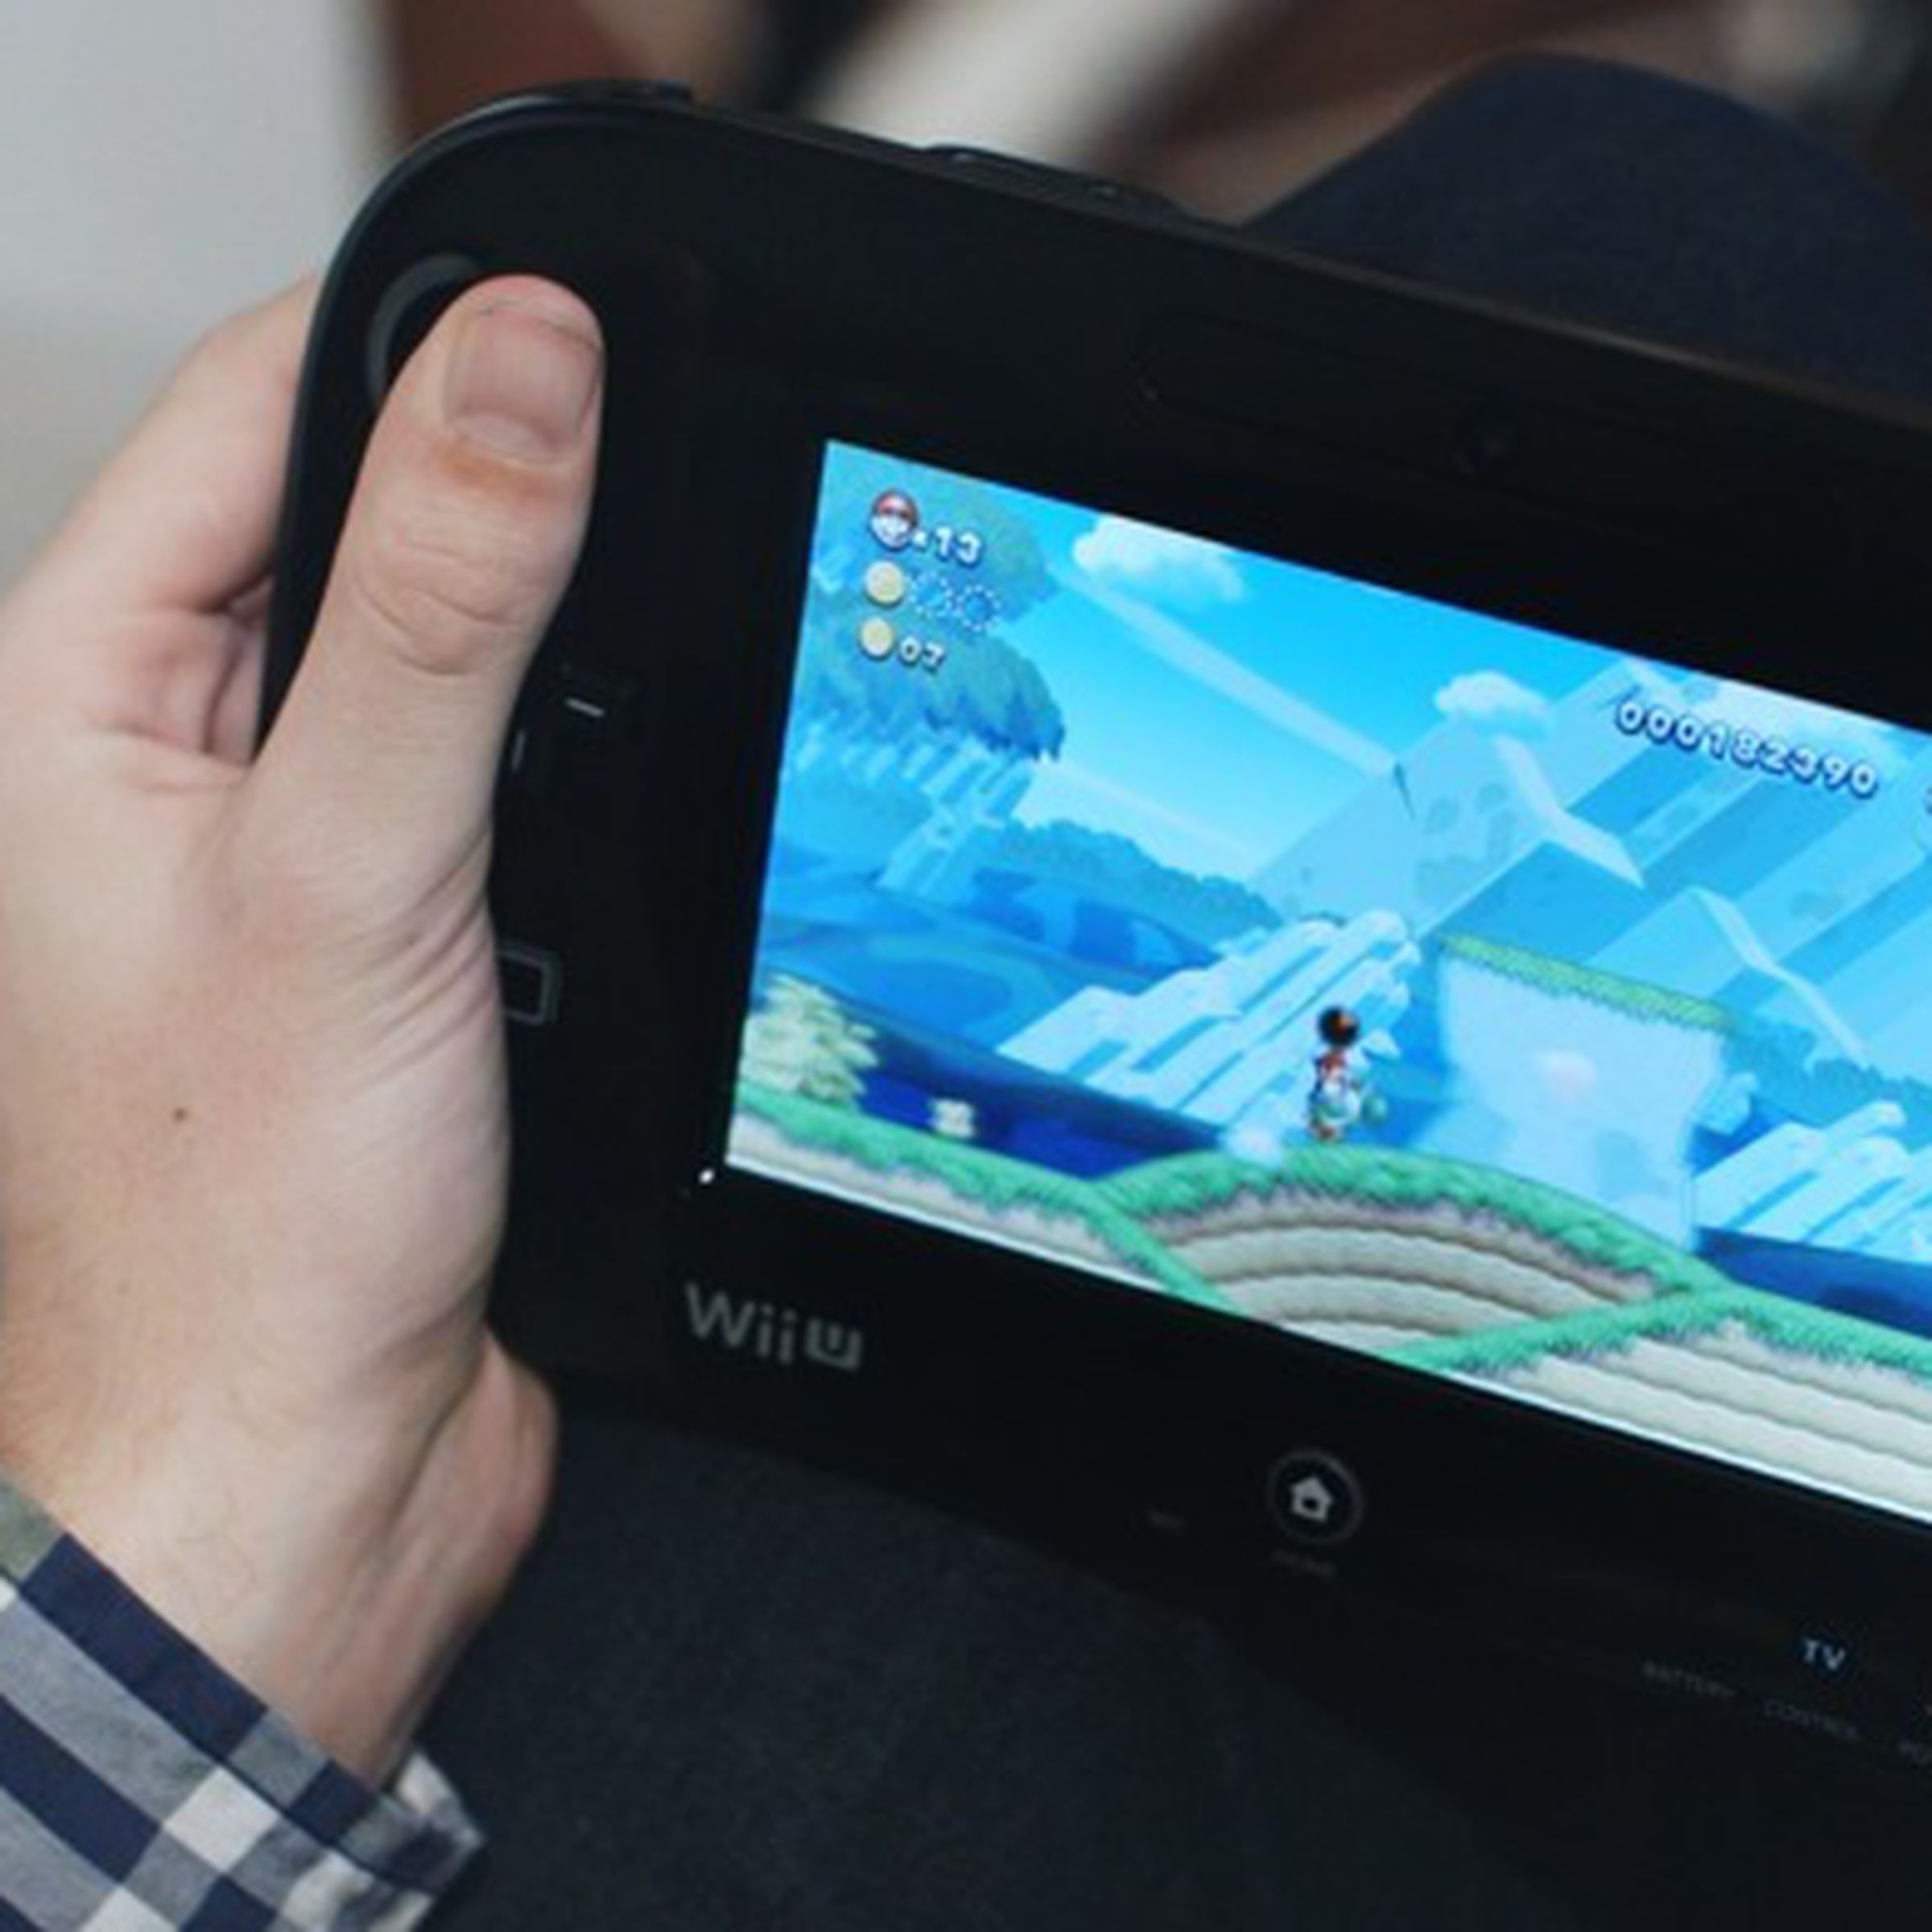 A photo showing someone playing the Wii U